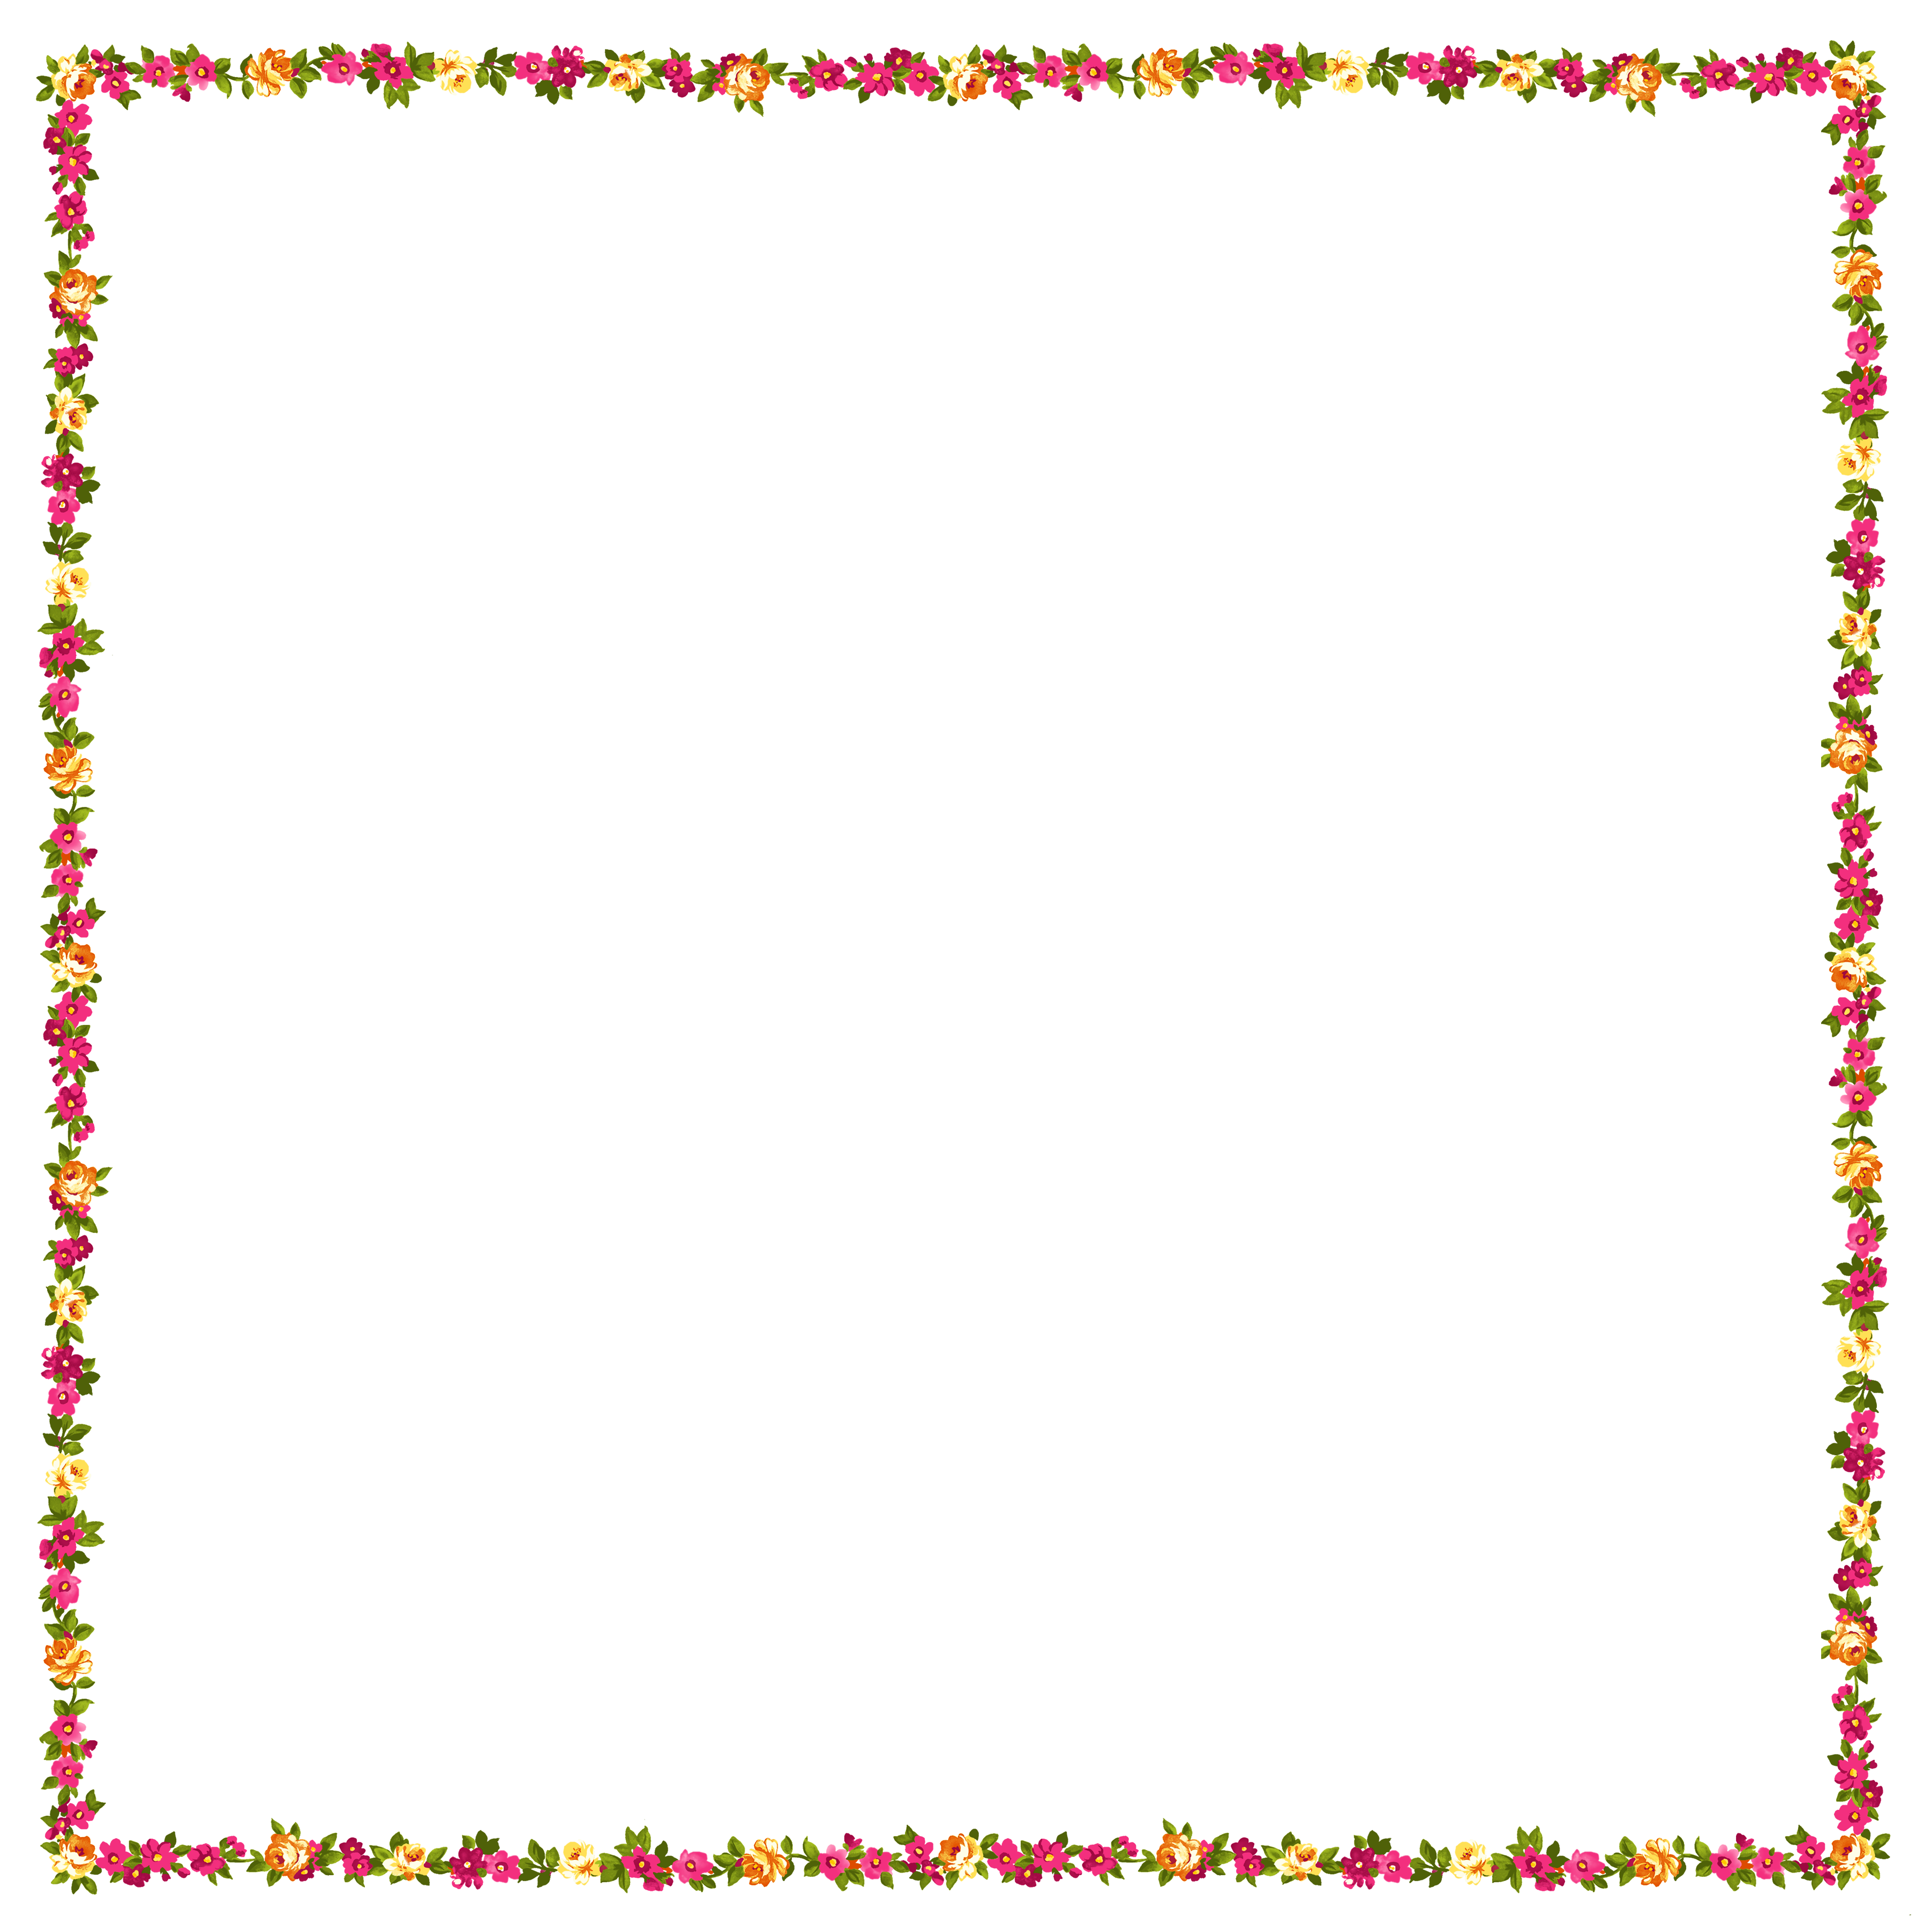 clipart frame png - photo #6